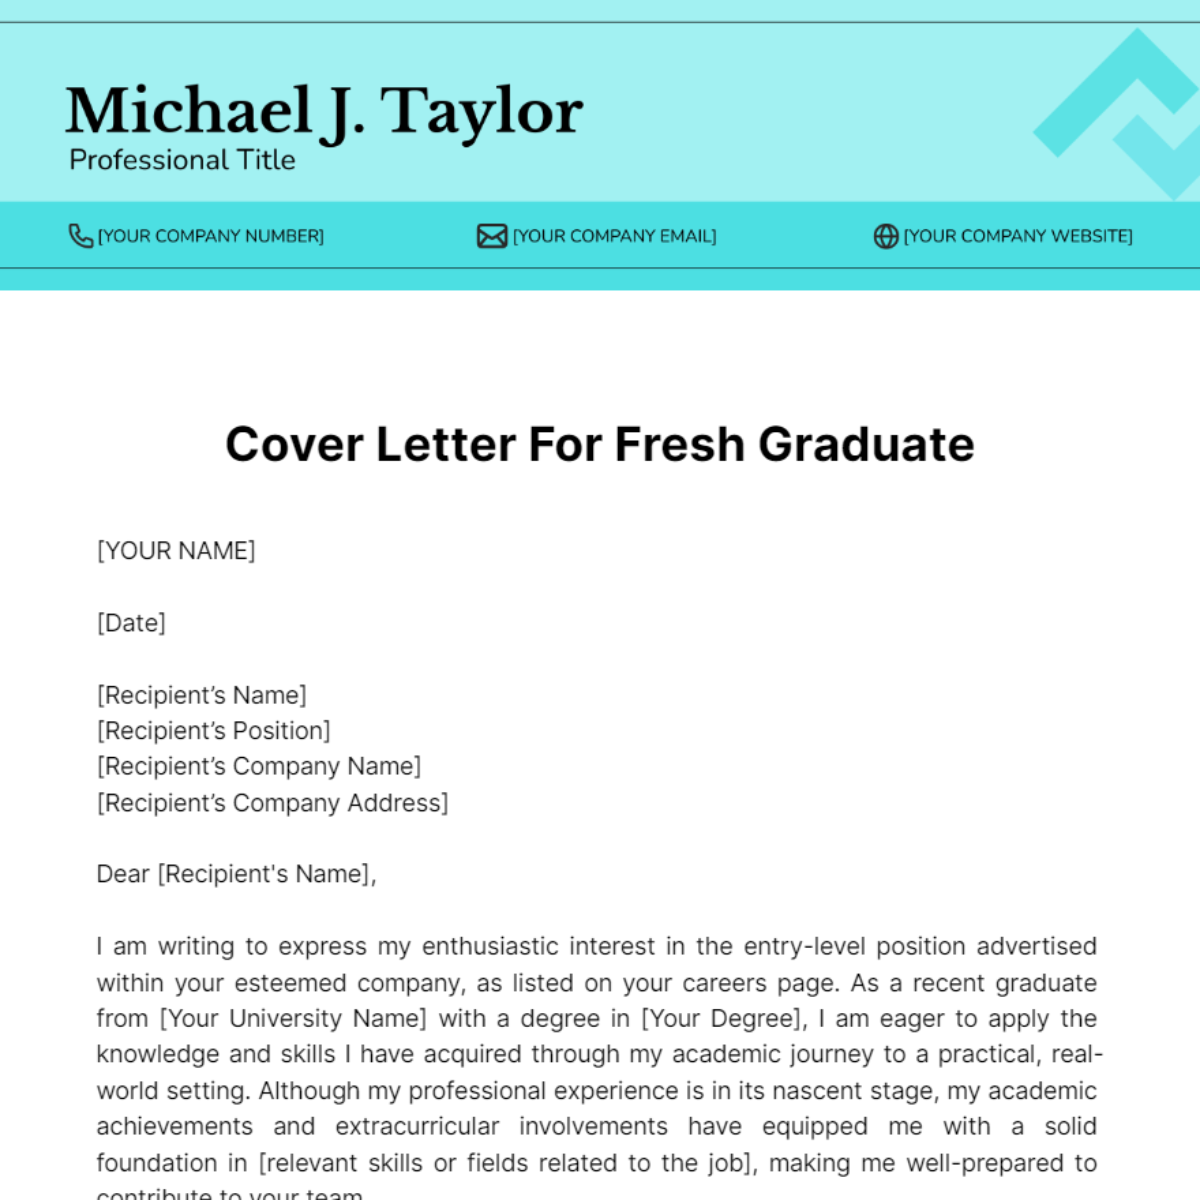 Cover Letter For Fresh Graduate Template